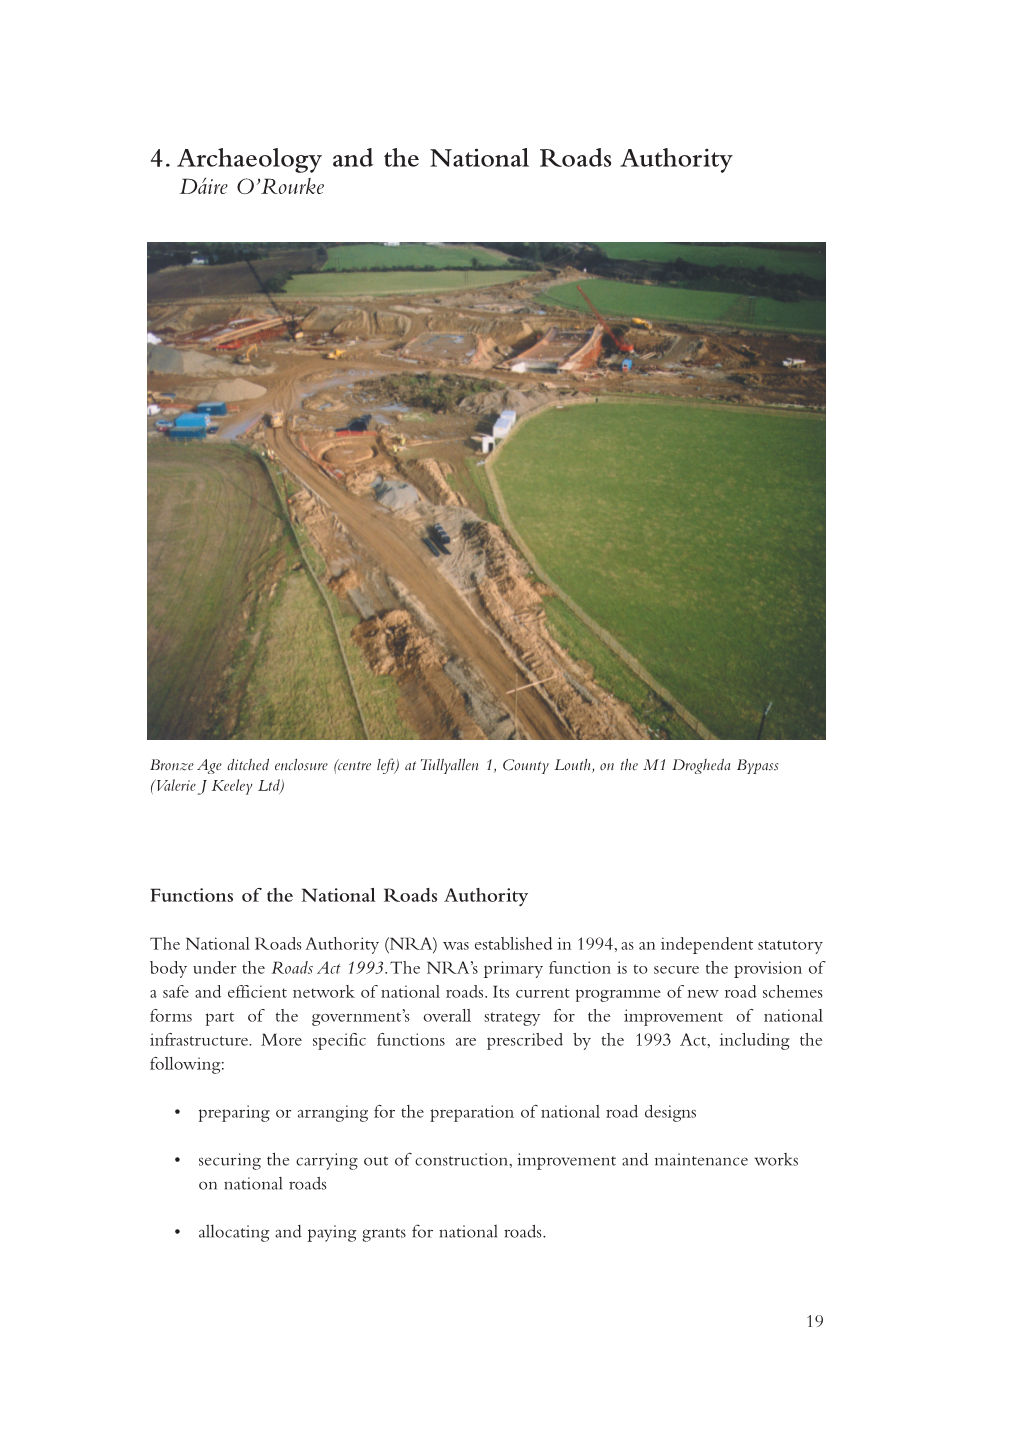 4. Archaeology and the National Roads Authority Dáire O’Rourke